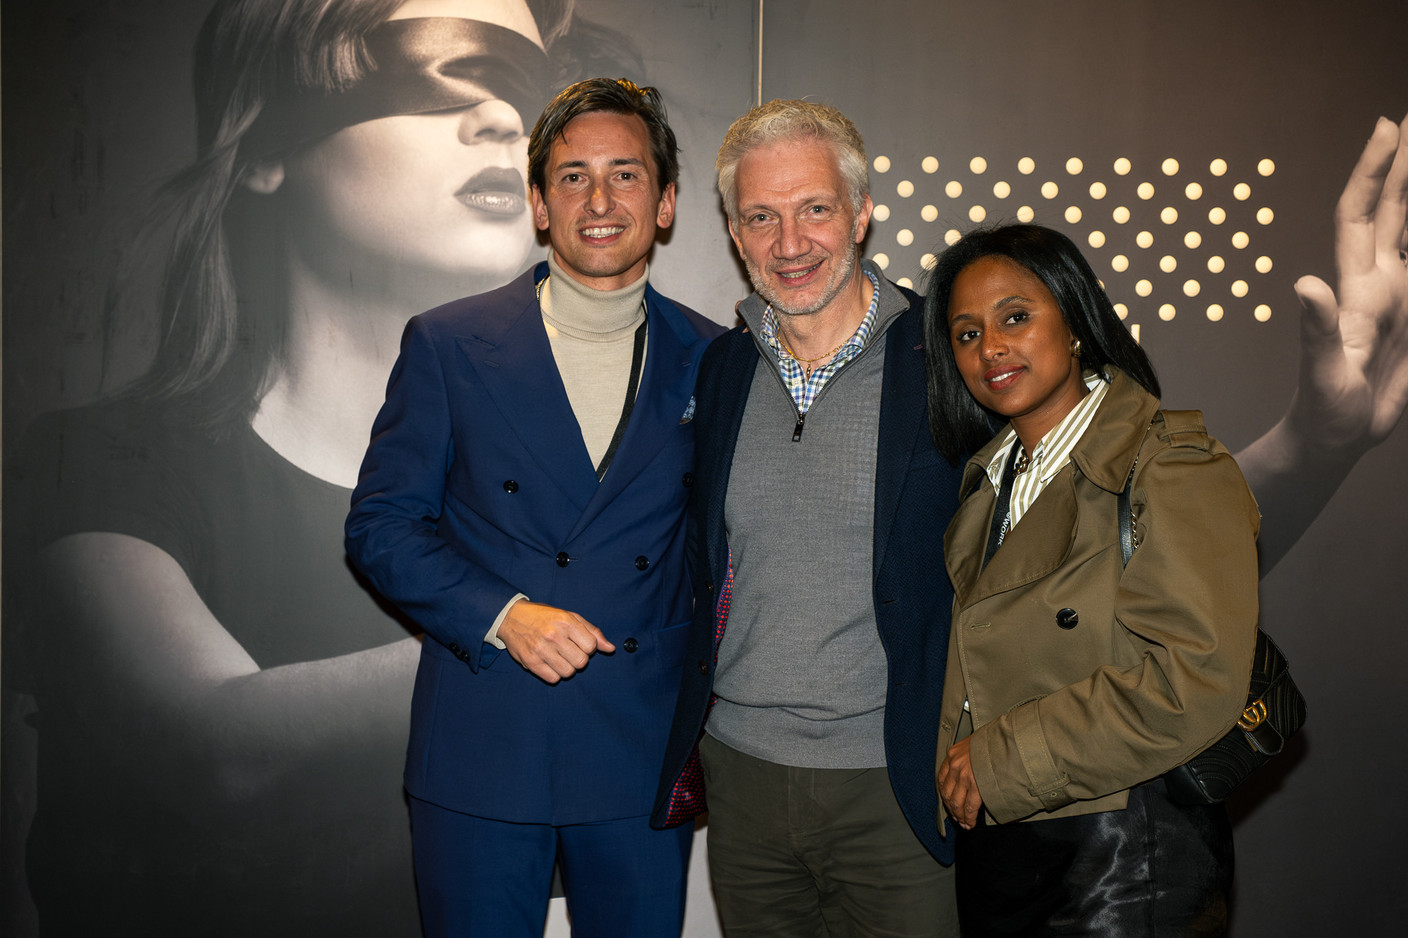 Léo Santoro (Maison Moderne), Pascal Wiscour (Conter Pascalogy) and Karine Fernandes (Carihome) at the 10x6 New European Bauhaus event organised by the Paperjam+Delano Business Club, 24 April 2024. Photo: Laurent Sturm